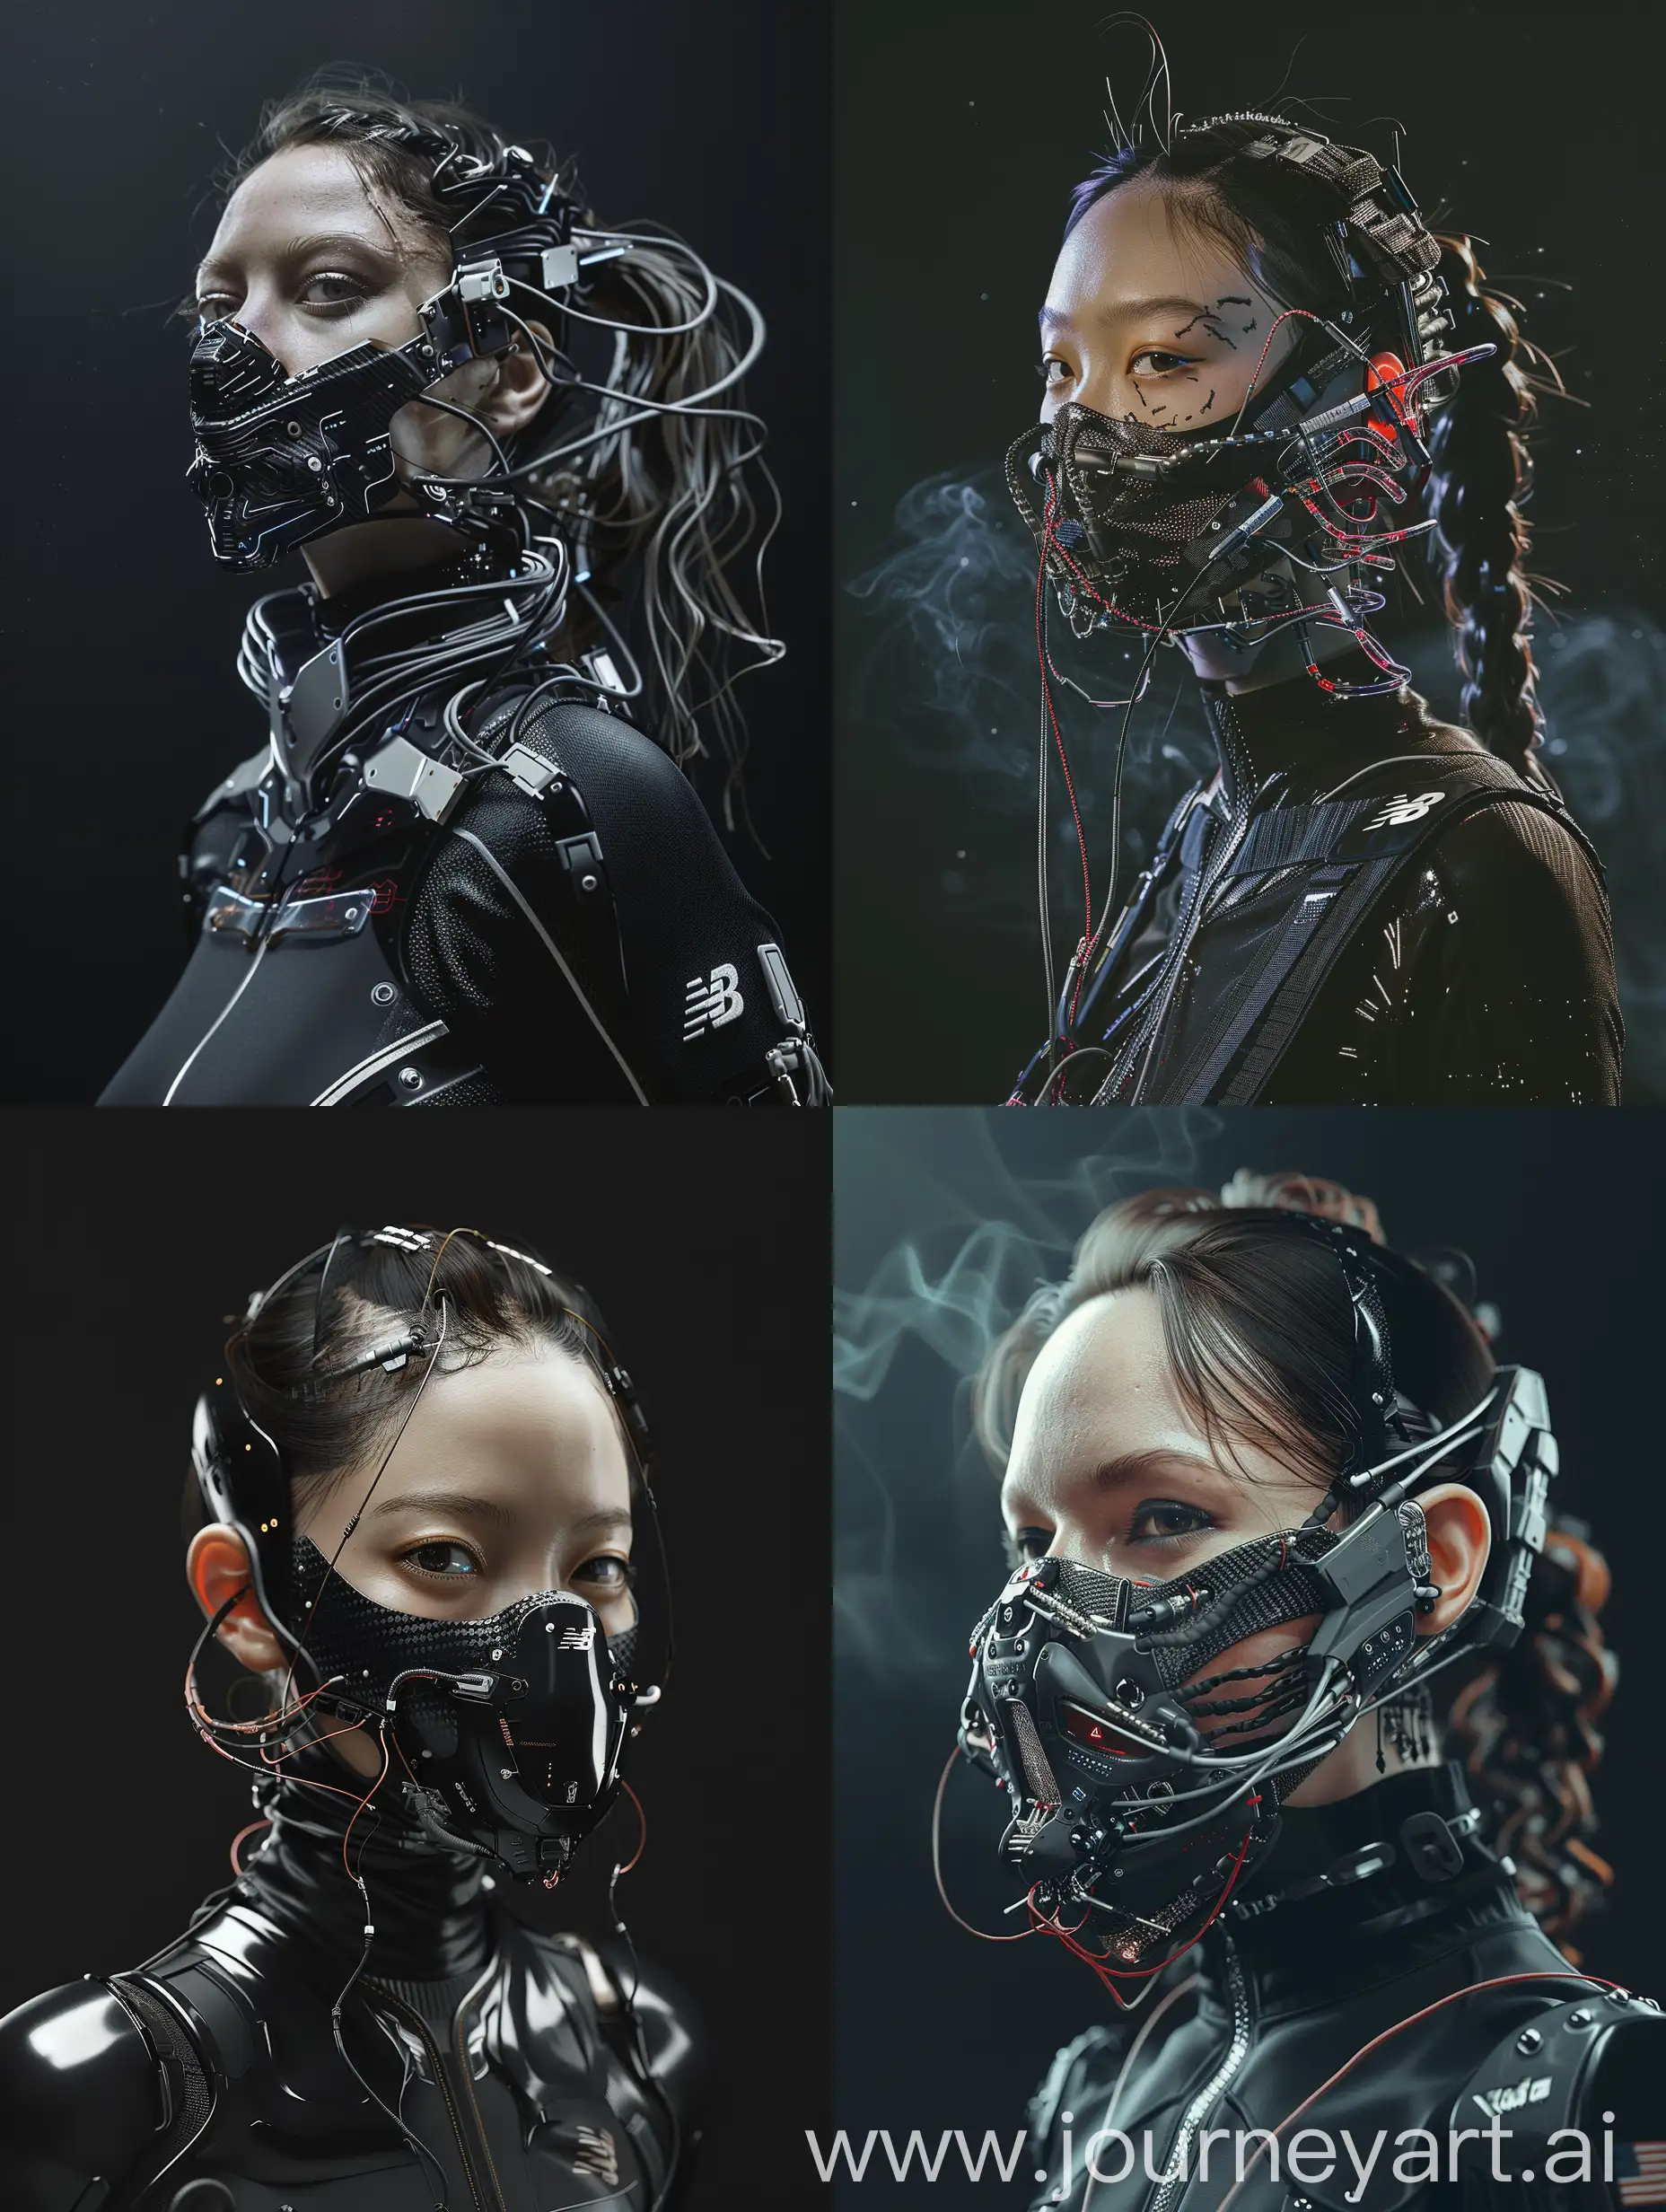 Against a sleek black backdrop, witness the captivating presence of a Beautiful characther adorned with a cybernetic mouth-covering mask. It seamlessly merges cutting-edge technology with intricate details, showcasing carbon fiber textures, sleek aluminum accents, and pulsating wires. Symbolizing the delicate equilibrium between humanity and machine, her appearance embodies the essence of a futuristic cyberpunk aesthetic, further accentuated by New Balance-inspired add-ons. With dynamic movements reminiscent of action-packed film sequences, accompanied by cinematic haze and an electric energy, she exudes an irresistible allure that commands attention